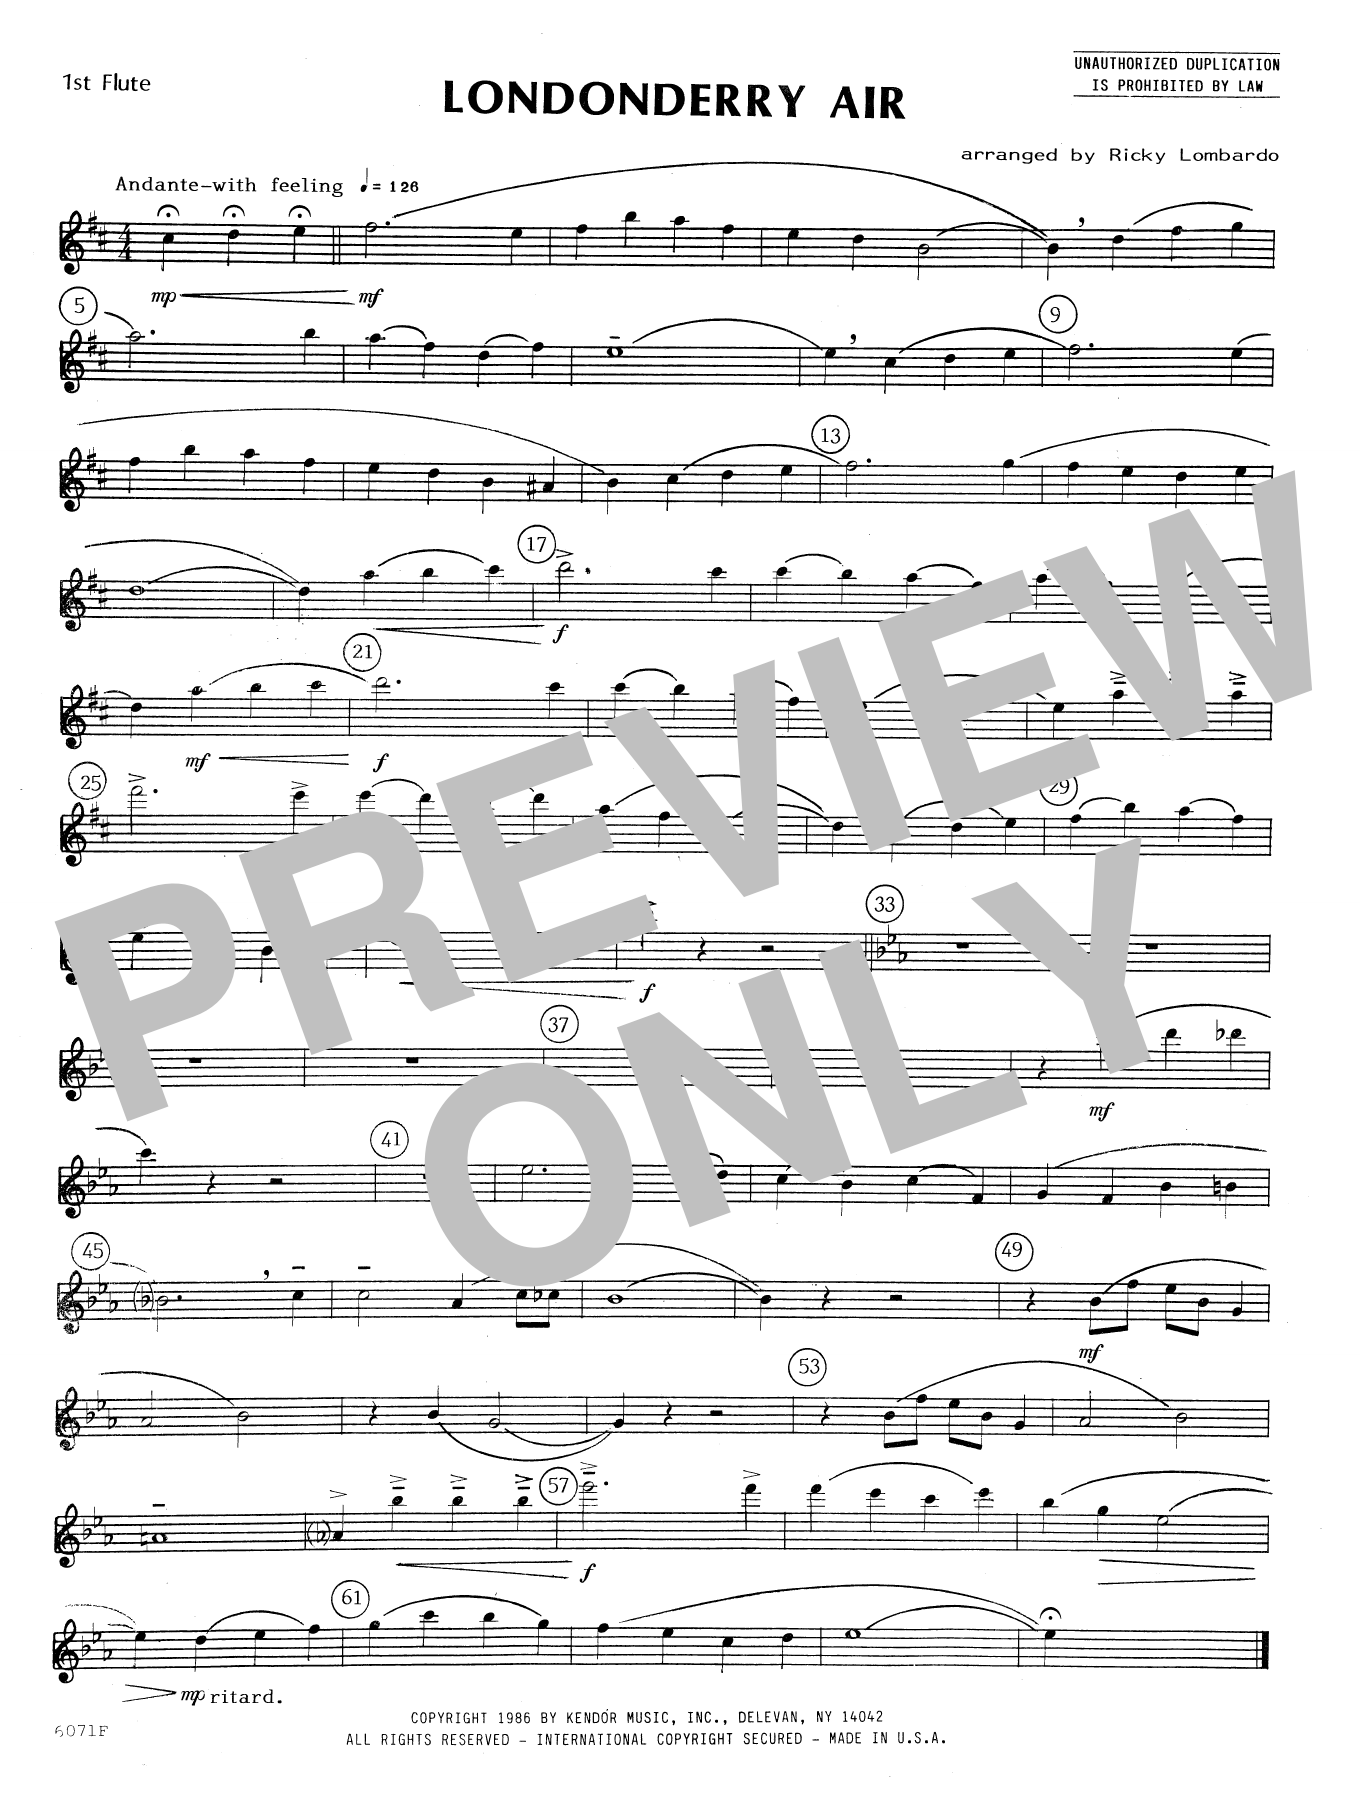 Download Lombardo Londonderry Air - 1st Flute Sheet Music